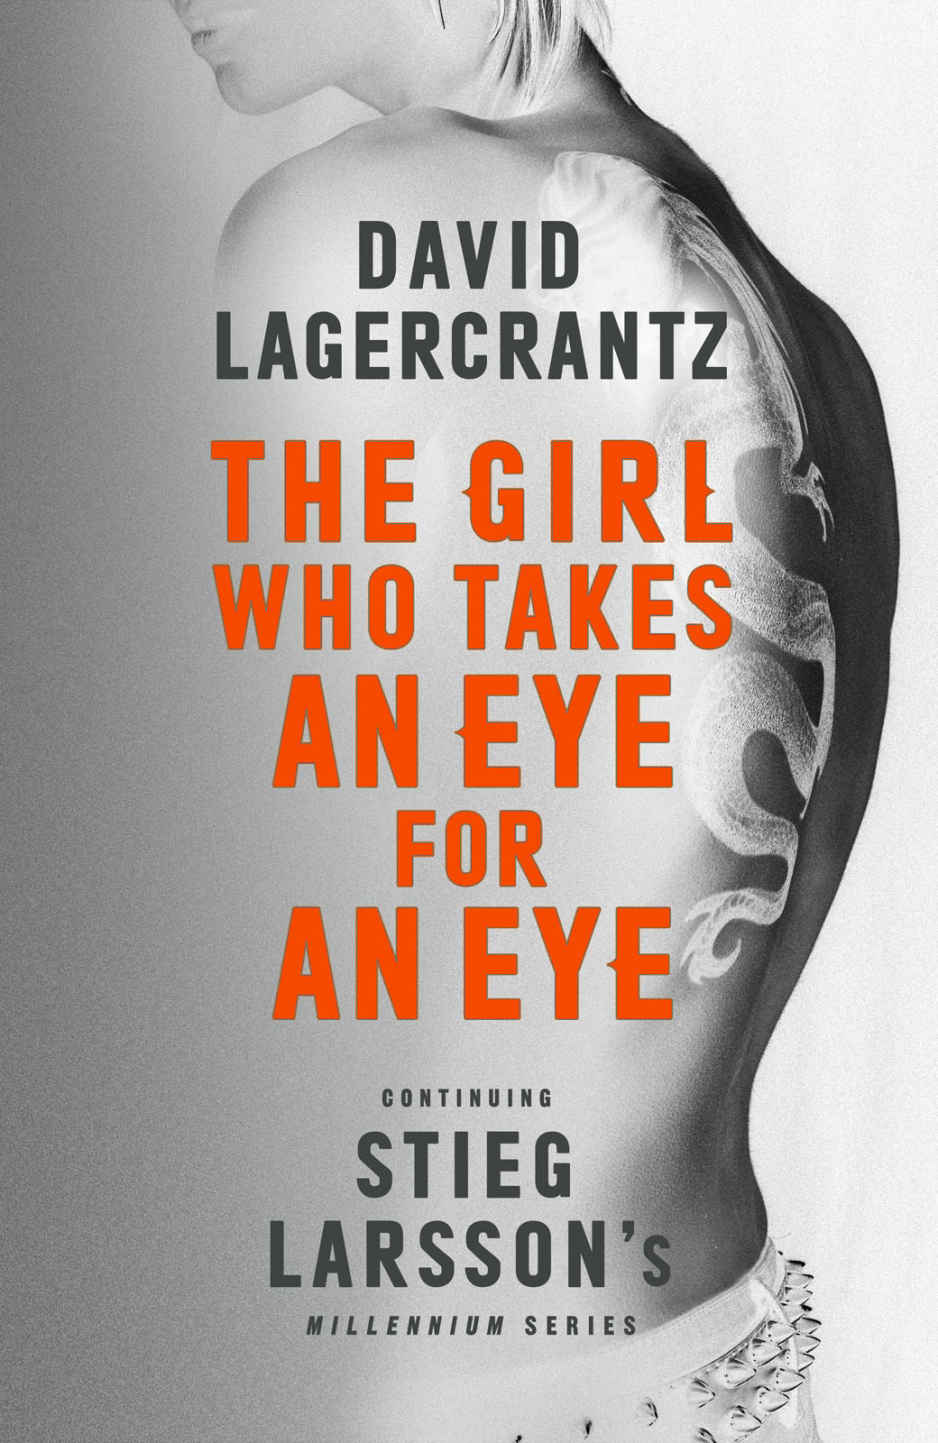 The Girl Who Takes an Eye for an Eye: A Dragon Tattoo story (Millennium Book 5)